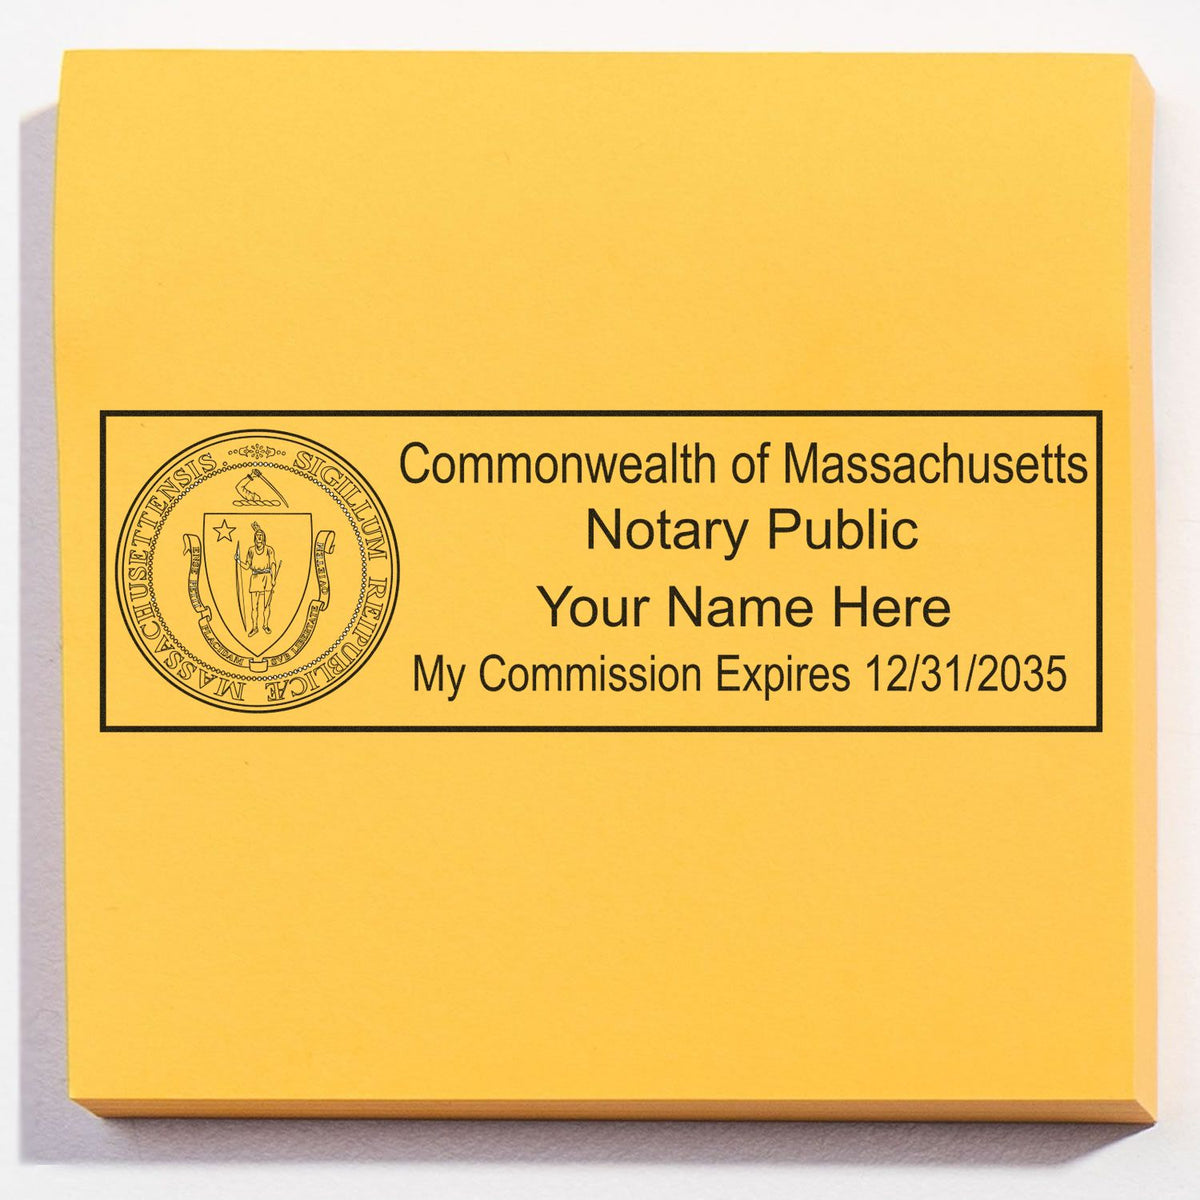 A photograph of the MaxLight Premium Pre-Inked Massachusetts State Seal Notarial Stamp stamp impression reveals a vivid, professional image of the on paper.